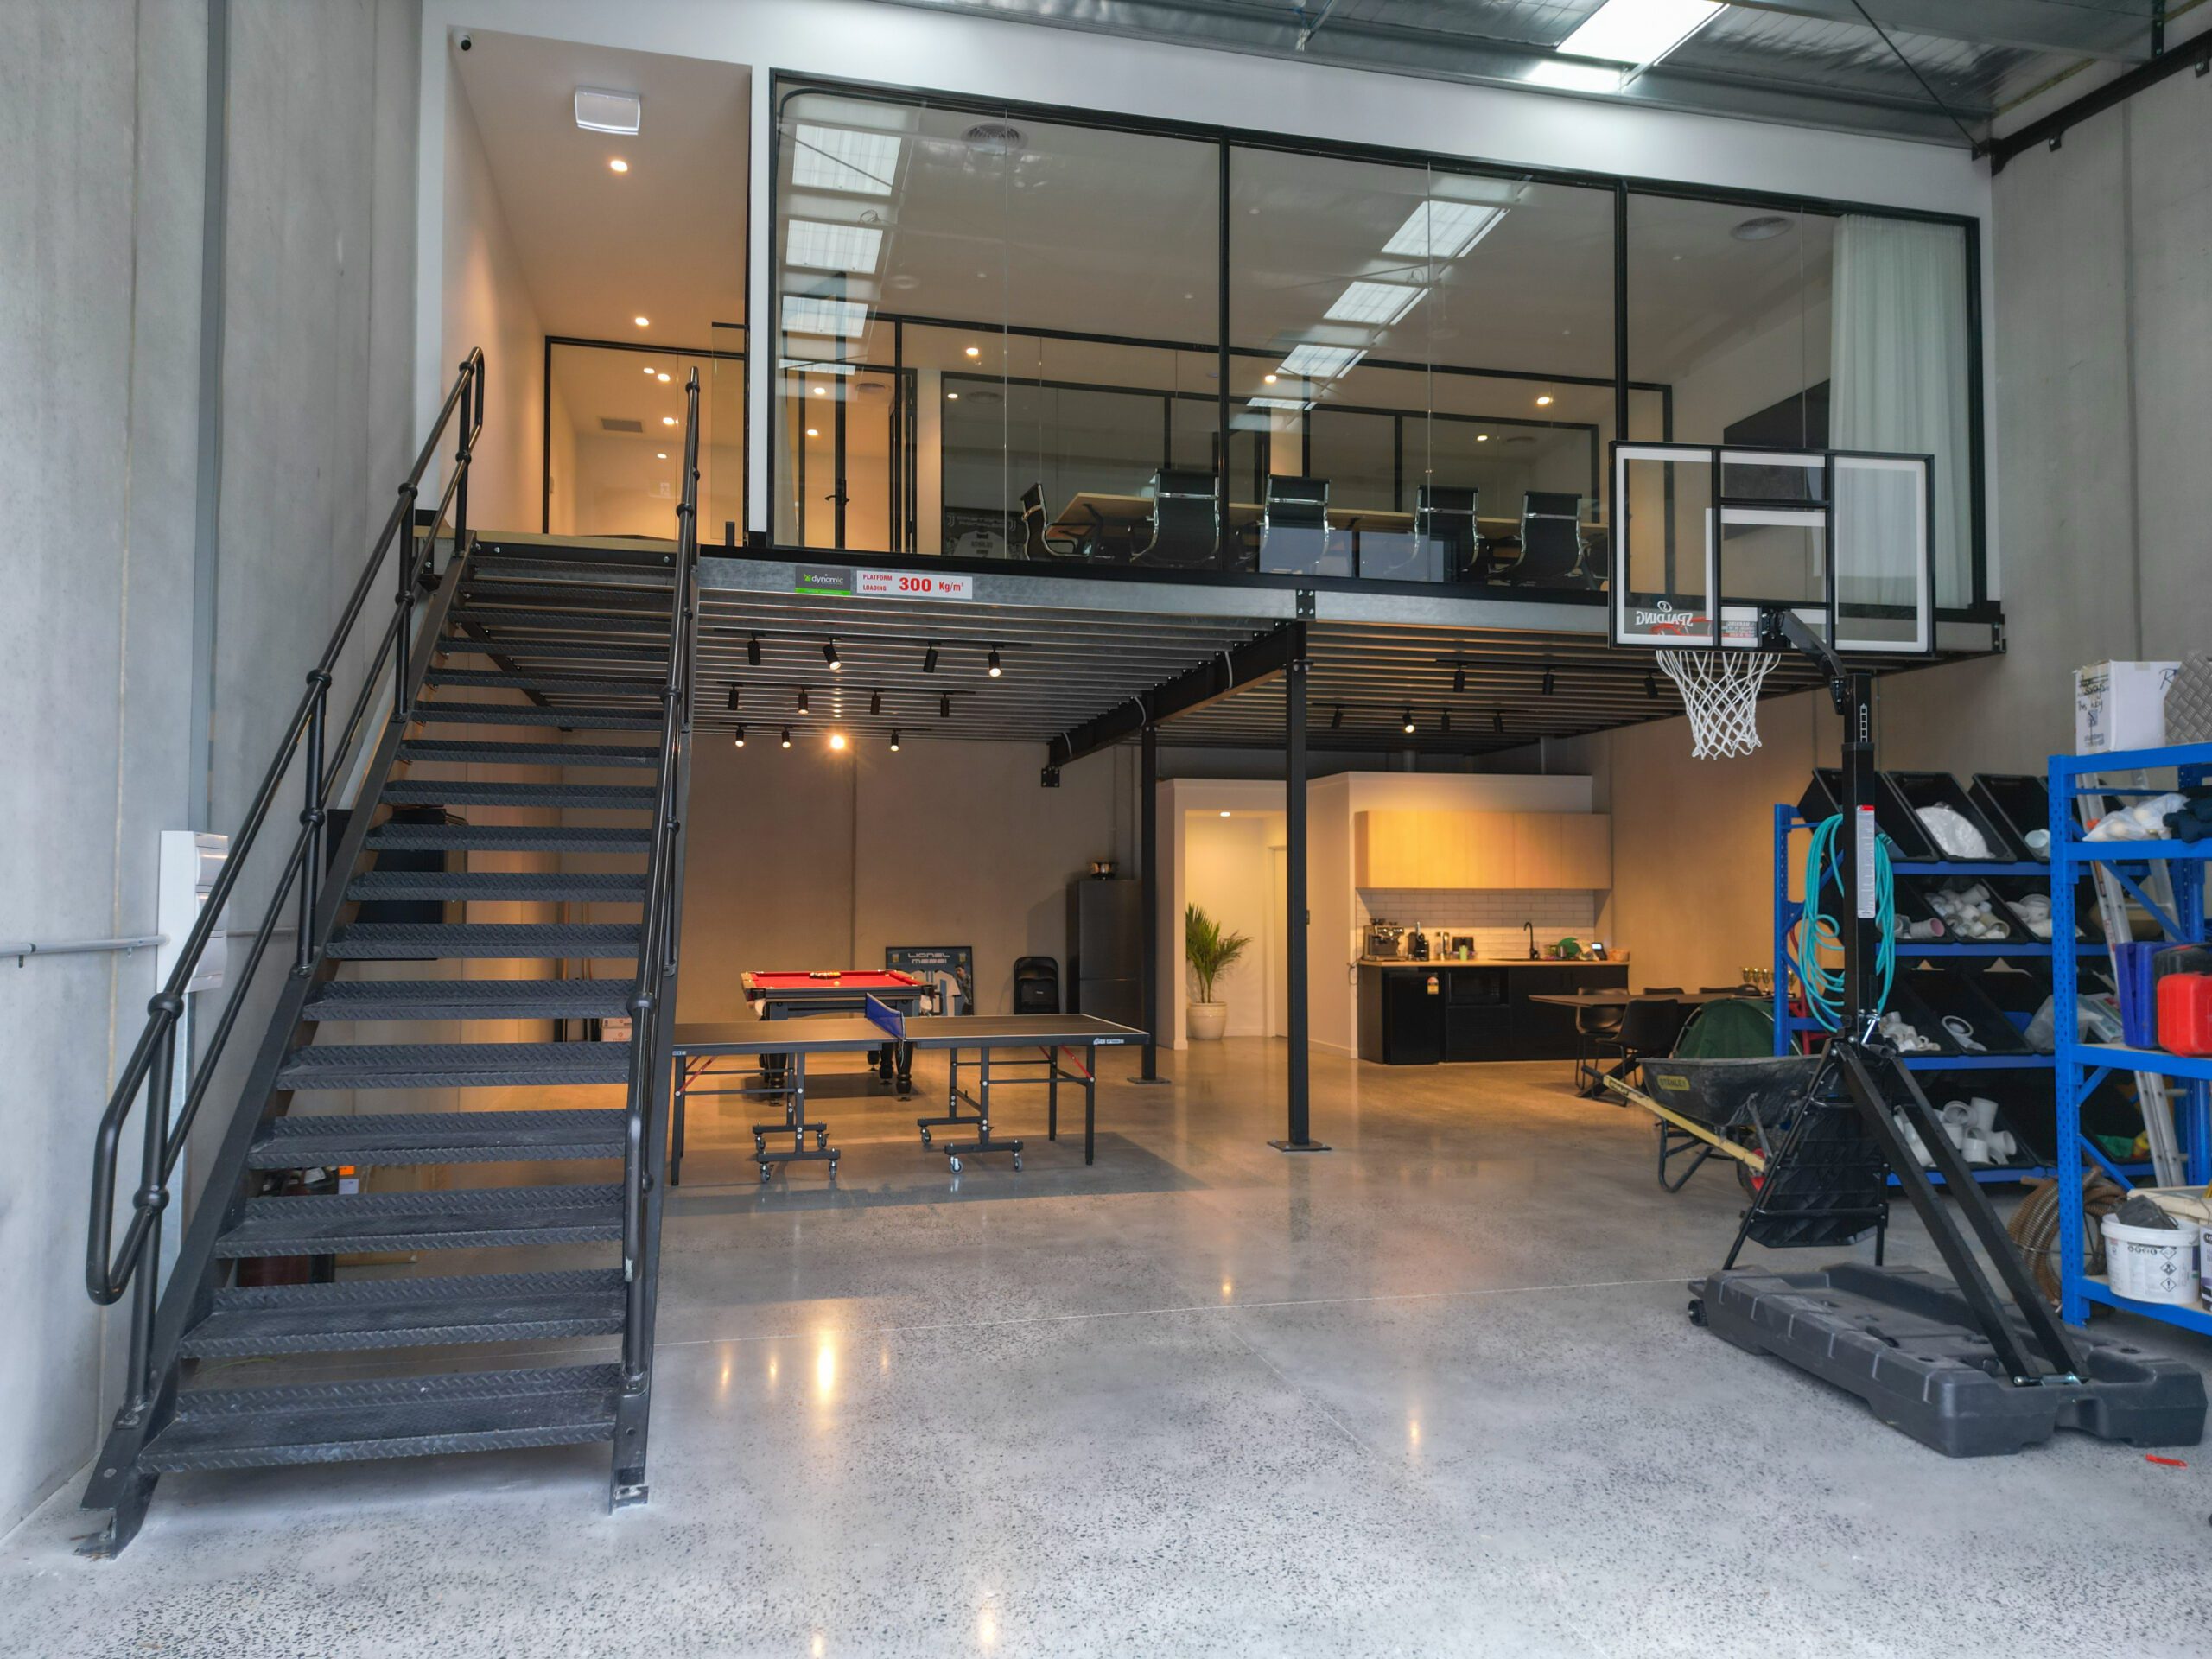 Spacious industrial warehouse with modern mezzanine floor, including office space and recreational area, showcasing efficient design.